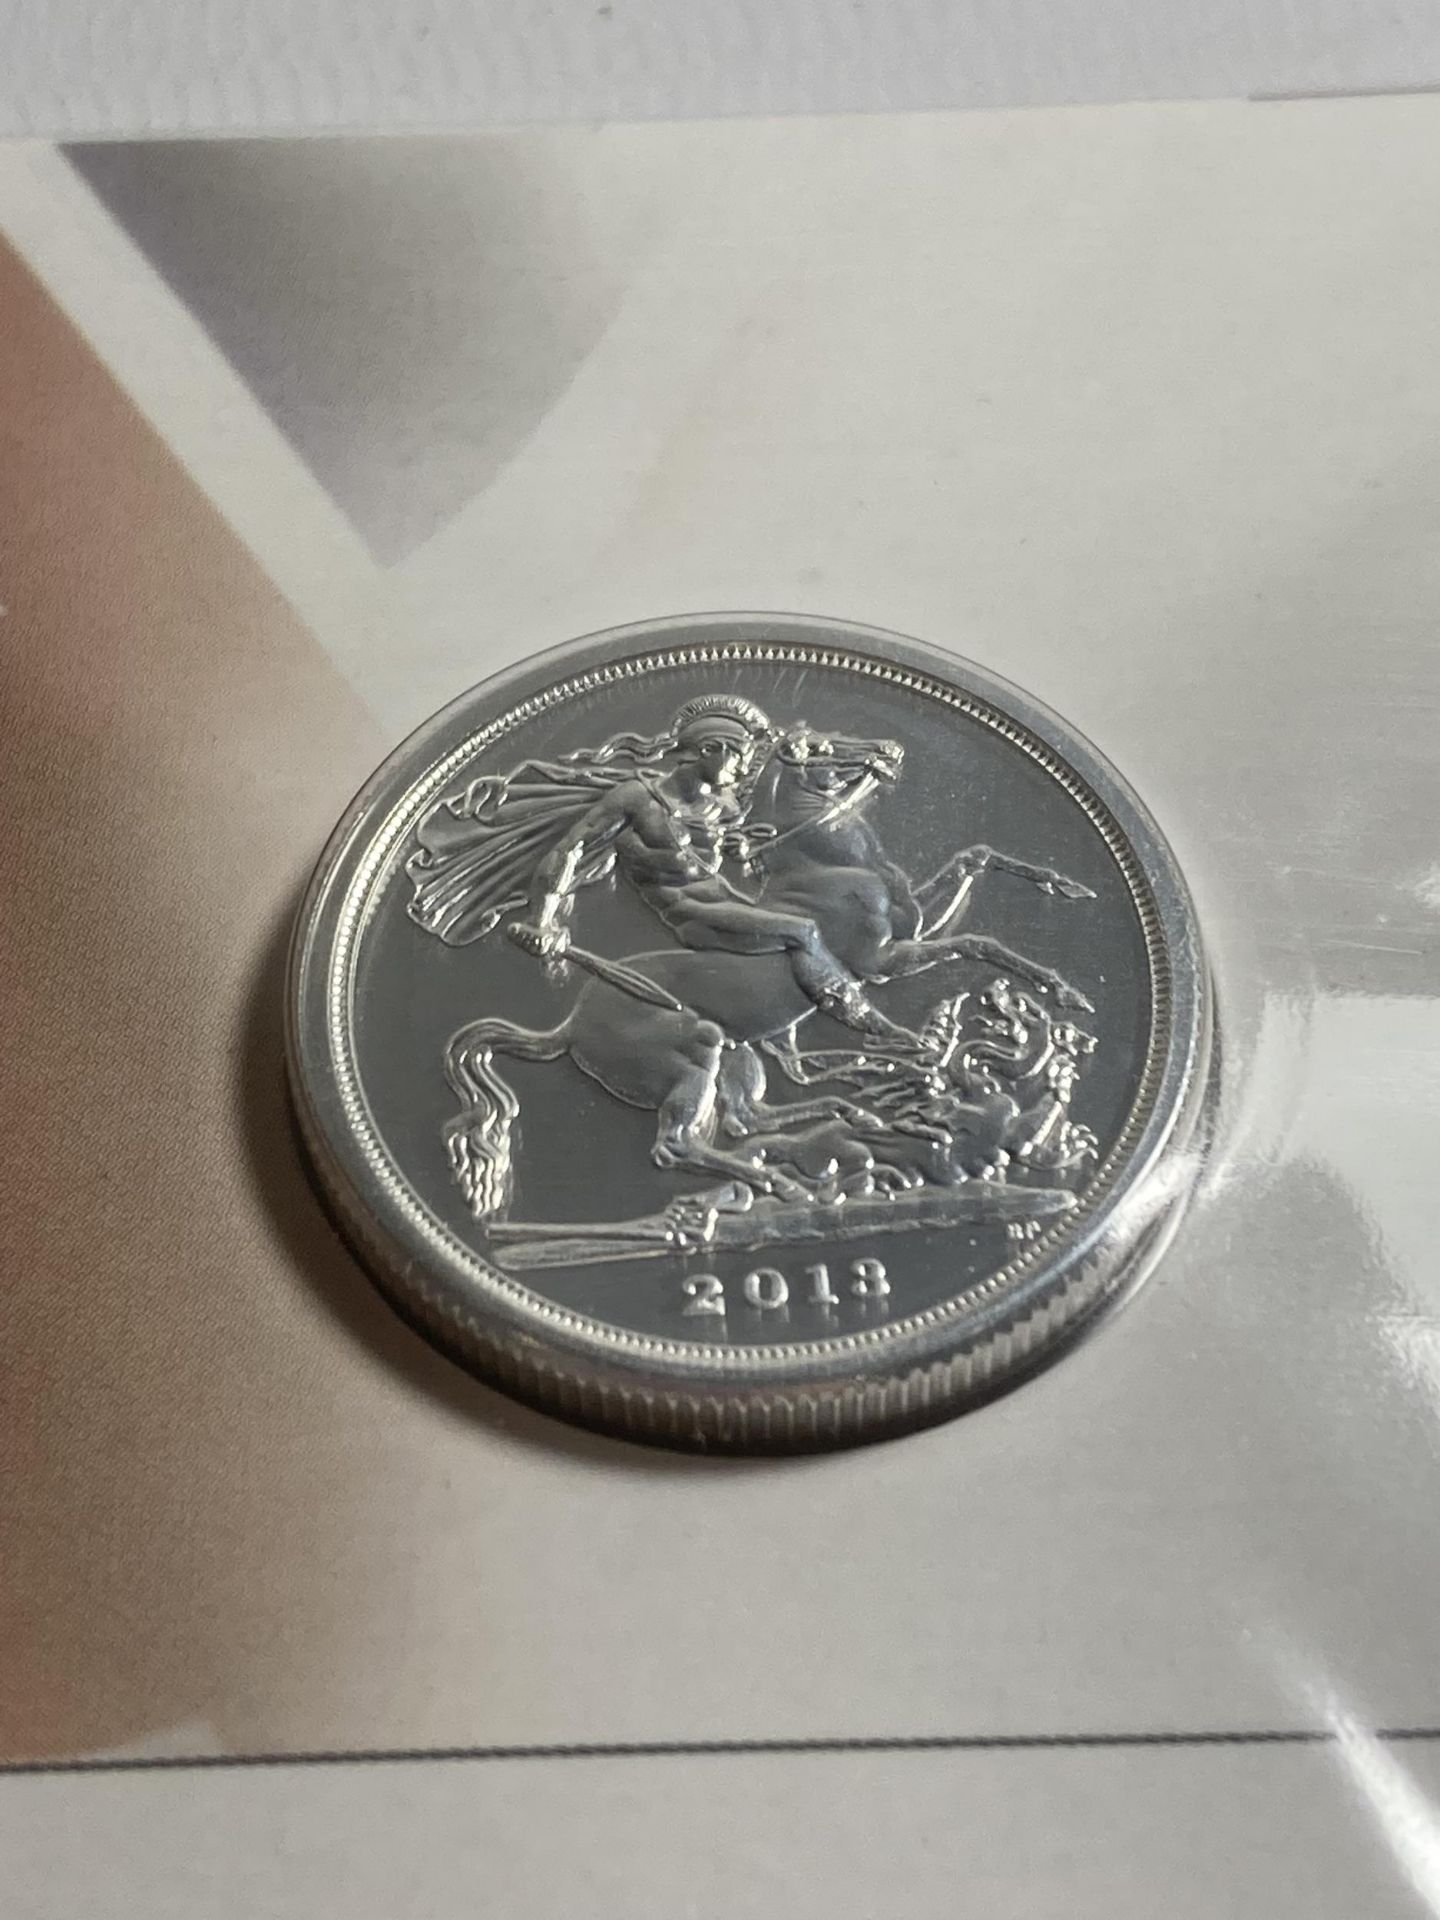 A ROYAL MINT GEORGE AND THE DRAGON 2013 UK £20 FINE SILVER COIN - Image 2 of 3